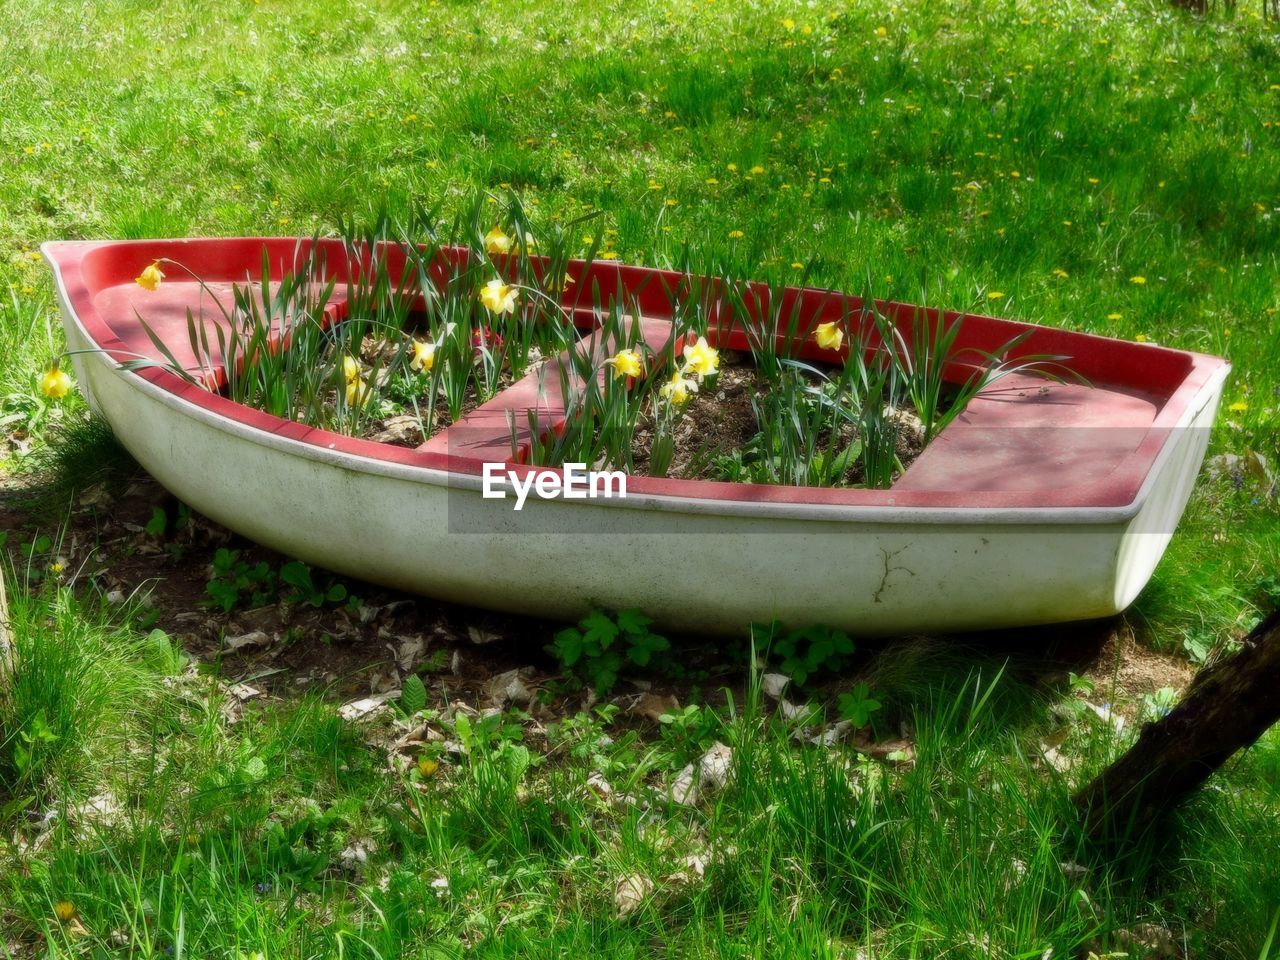 ABANDONED BOAT MOORED ON GRASS BY WATER